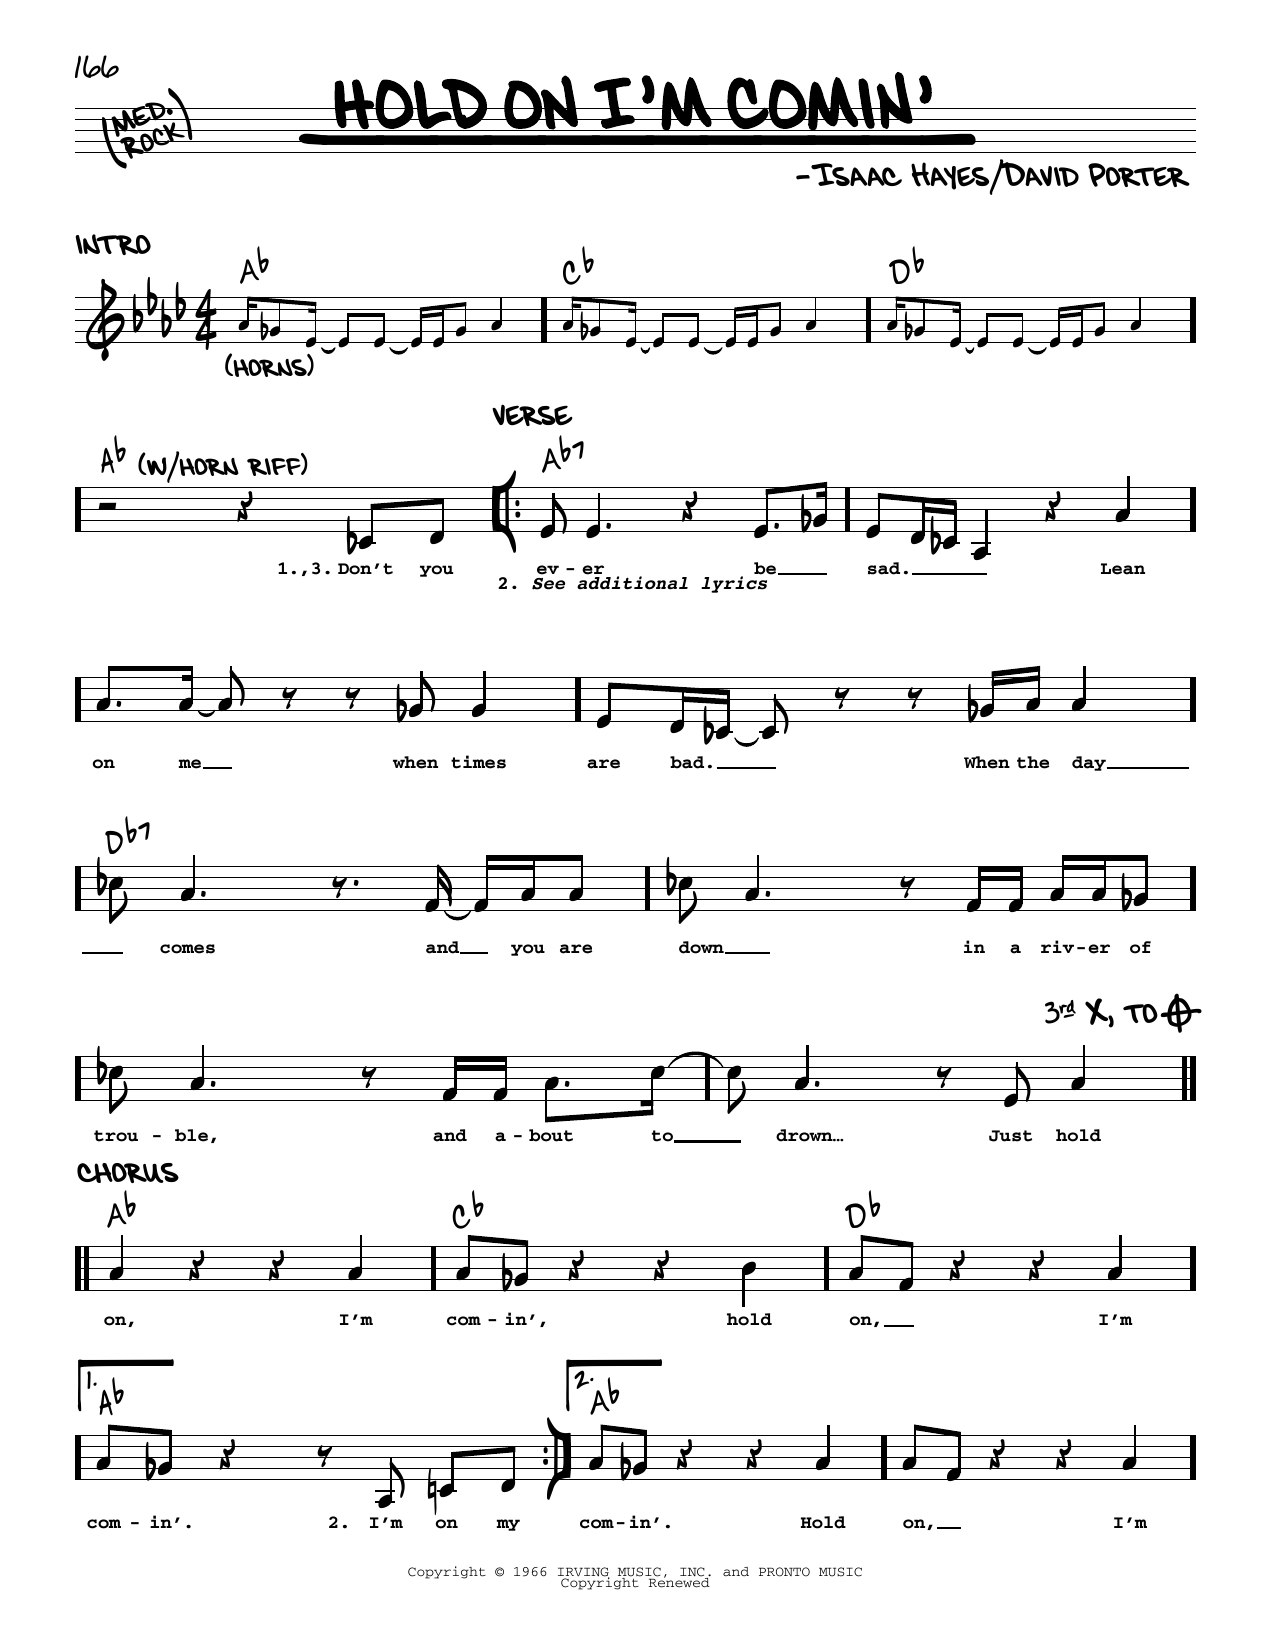 Download B.B. King & Eric Clapton Hold On I'm Comin' Sheet Music